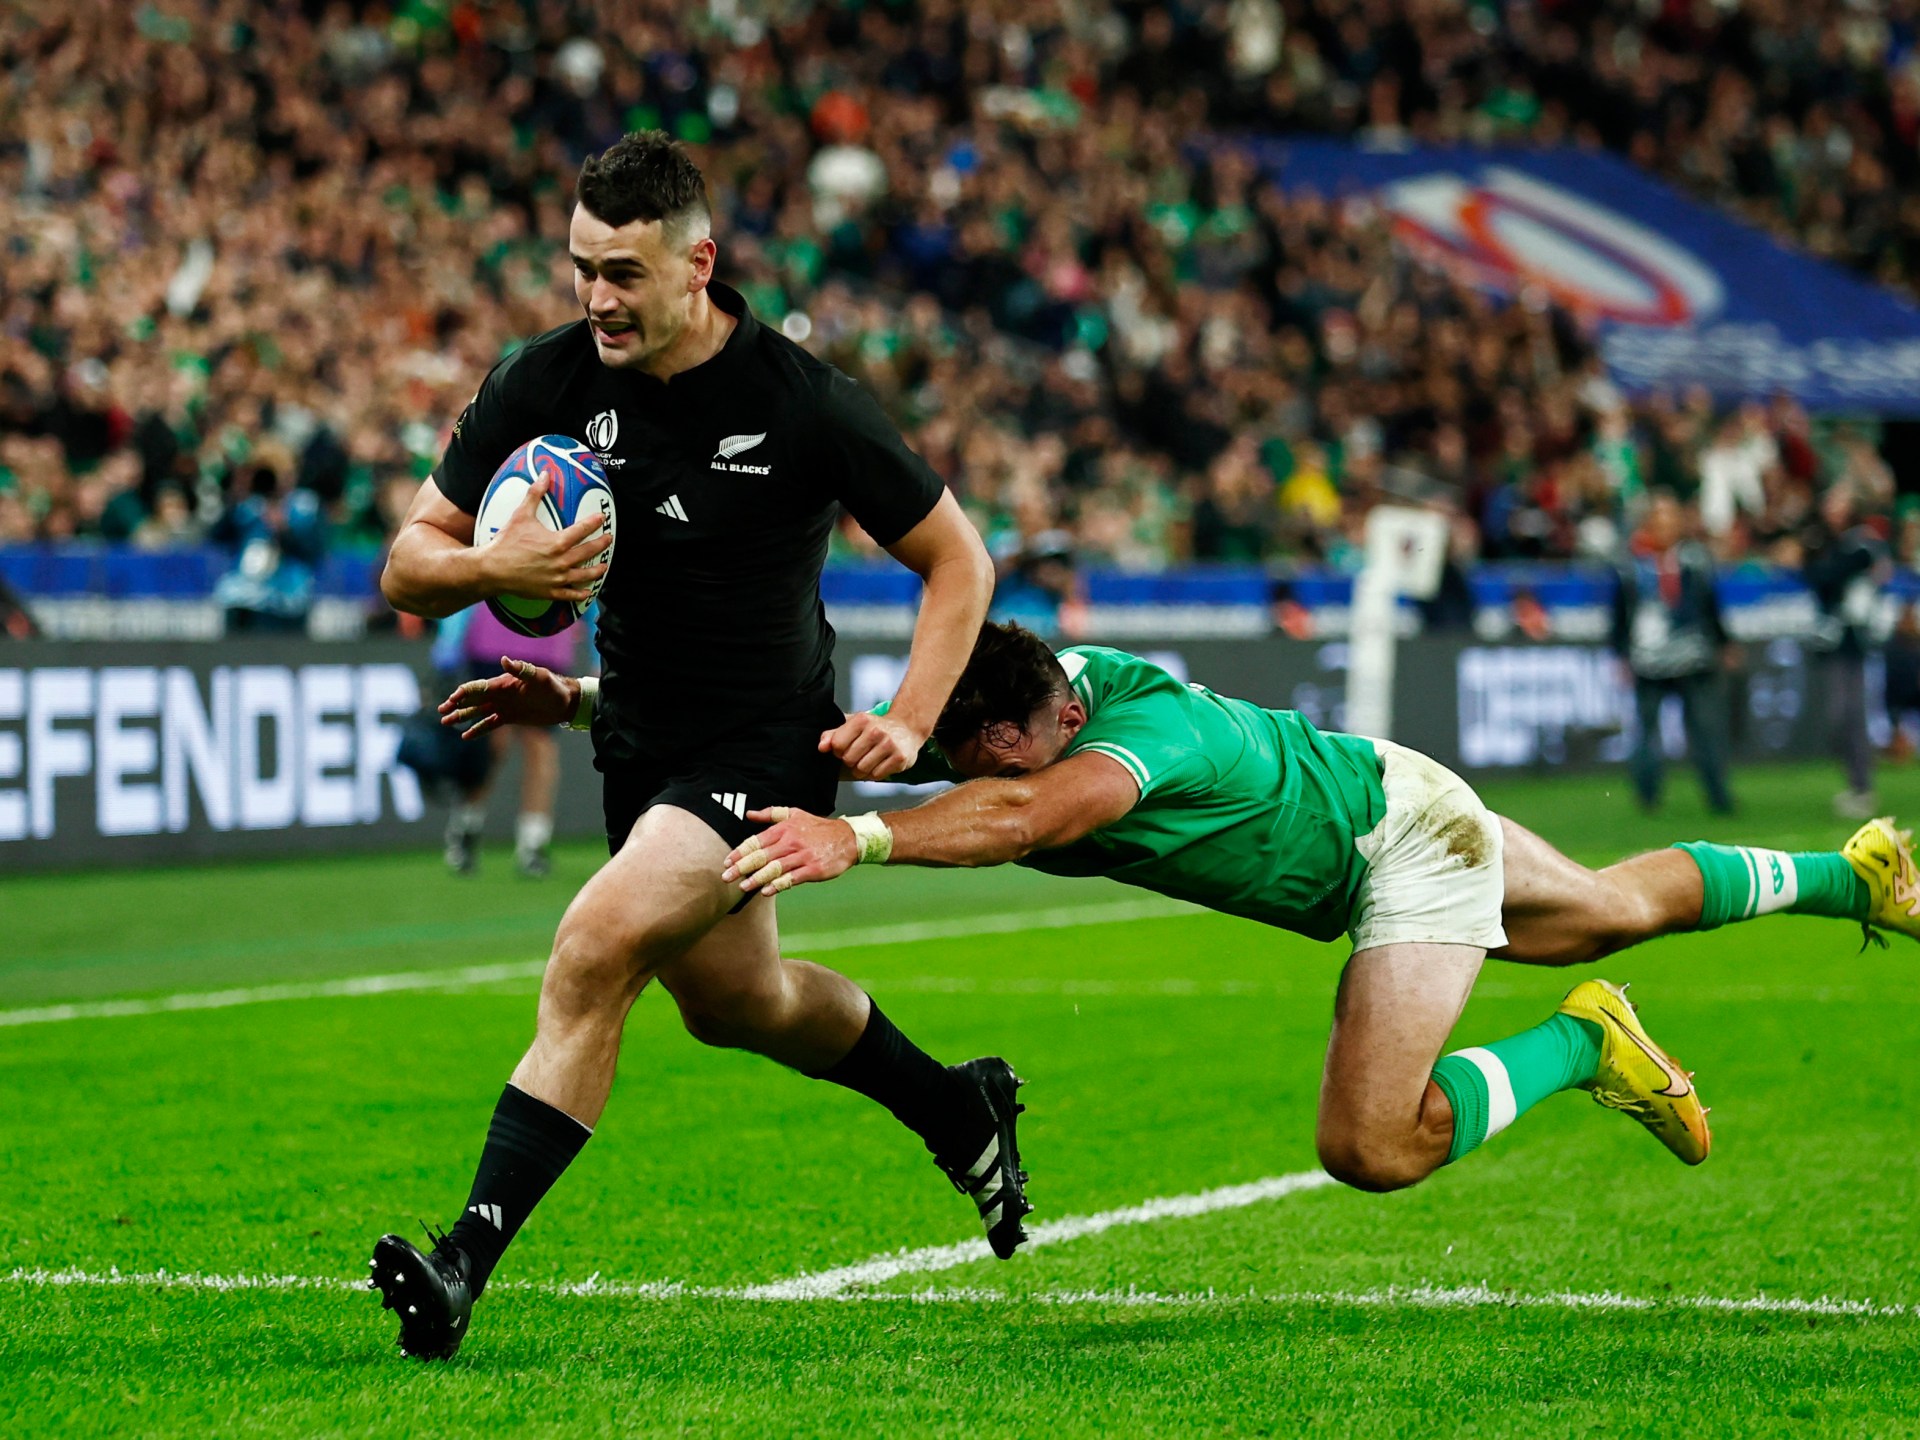 New Zealand beat Ireland in epic Rugby World Cup quarterfinal